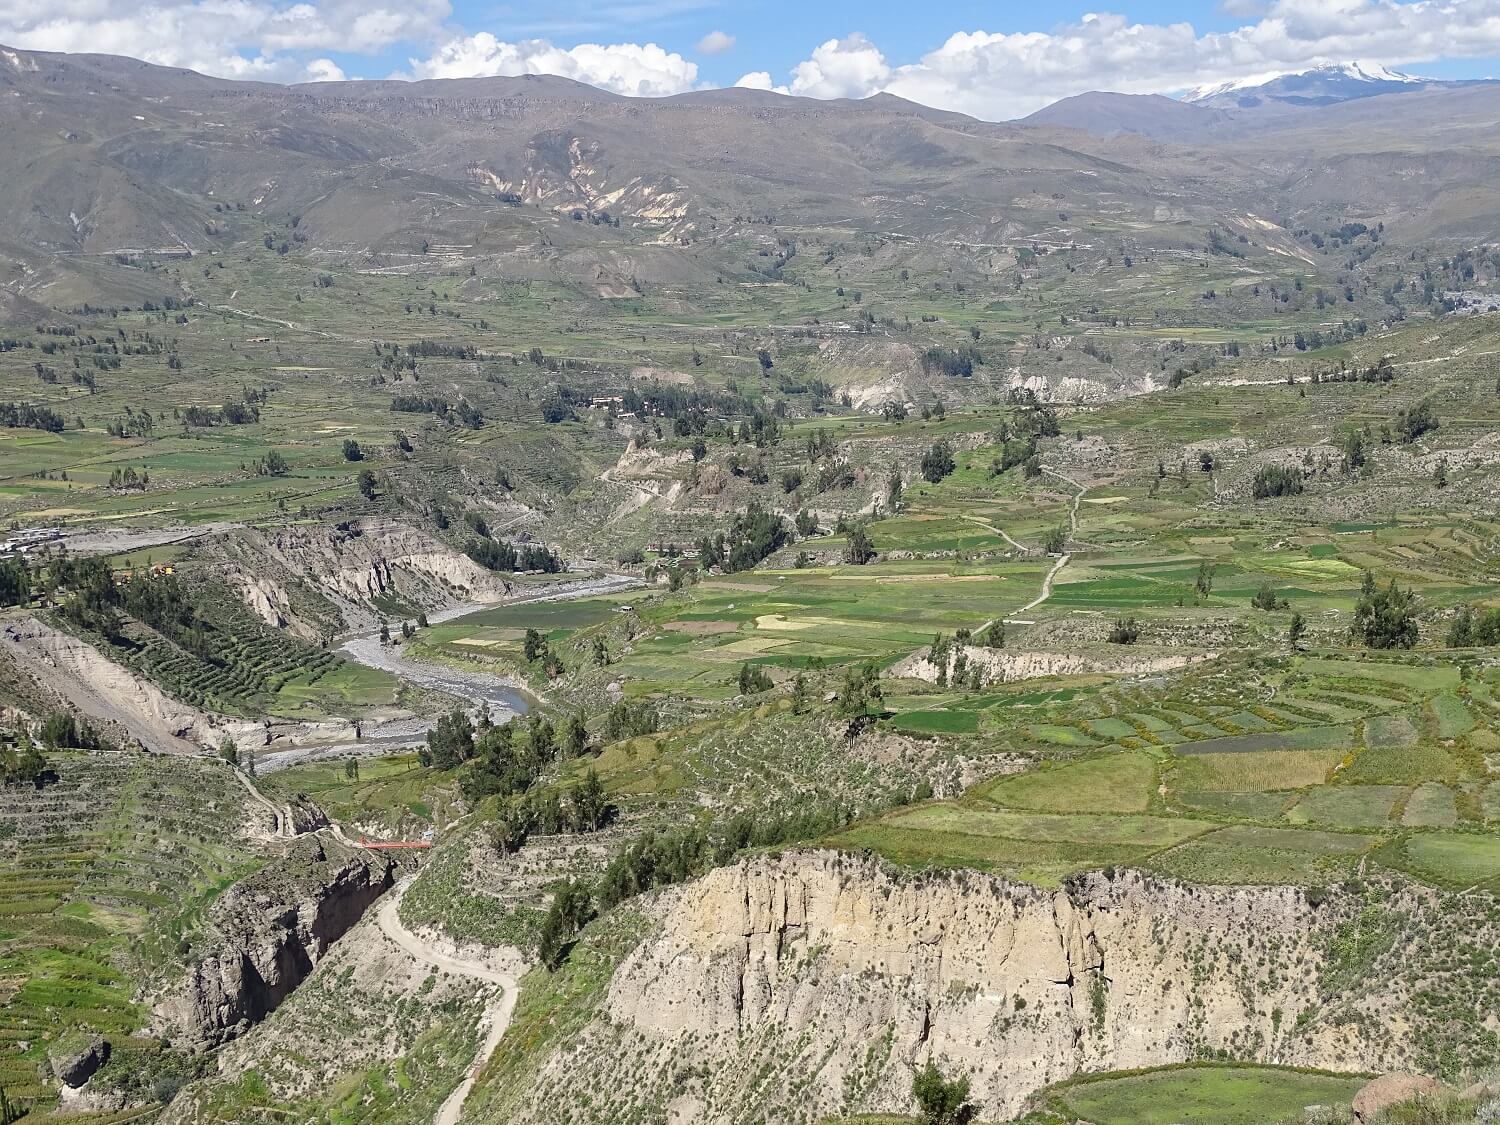 11Landscape of the Colca Canyon, Peru, from a viewpoint close to Coporaque, Peru. Visit the Colca Canyon RESPONSibly with RESPONSible Travel Peru